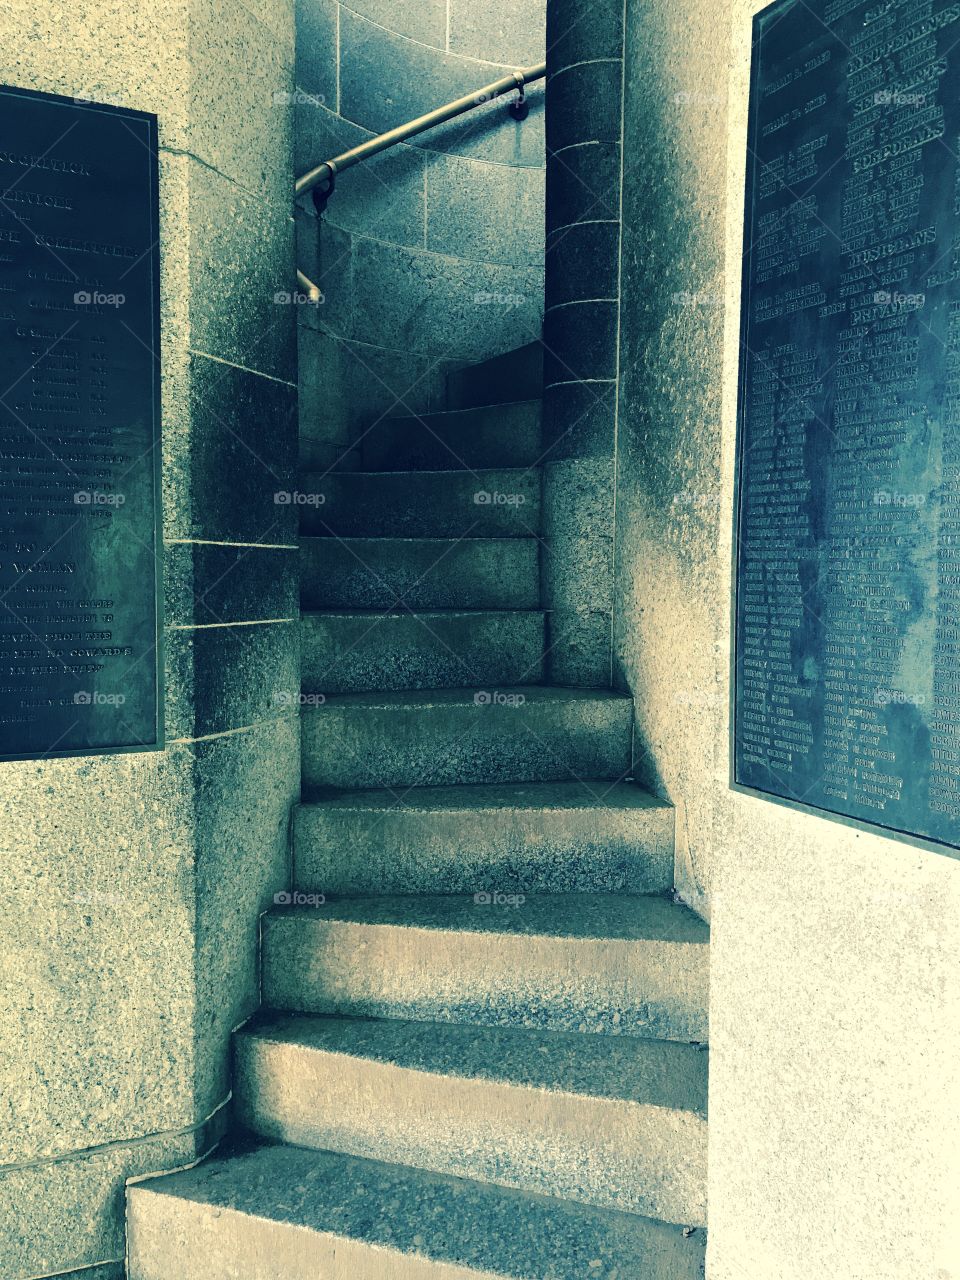 Stairs up the Tower